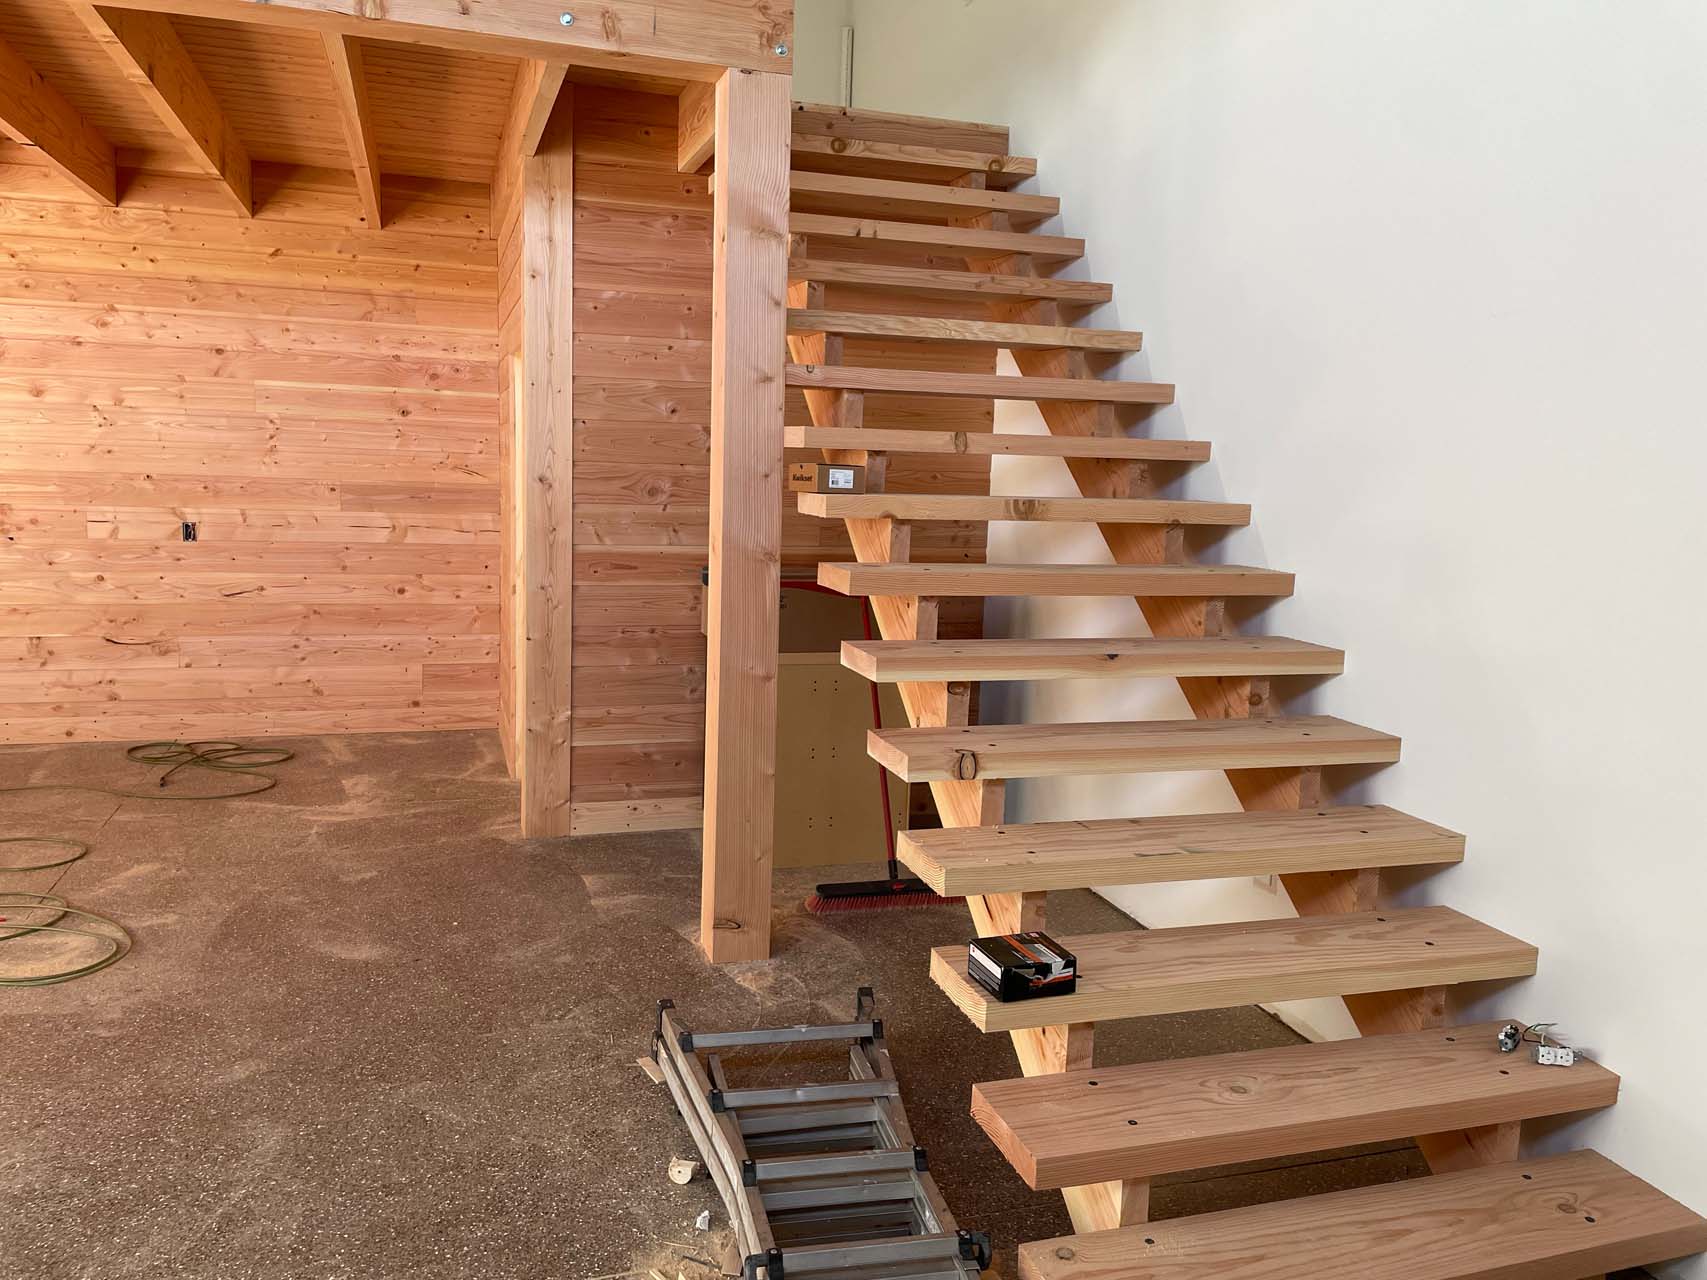 Wooden stairs lead up to a loft area